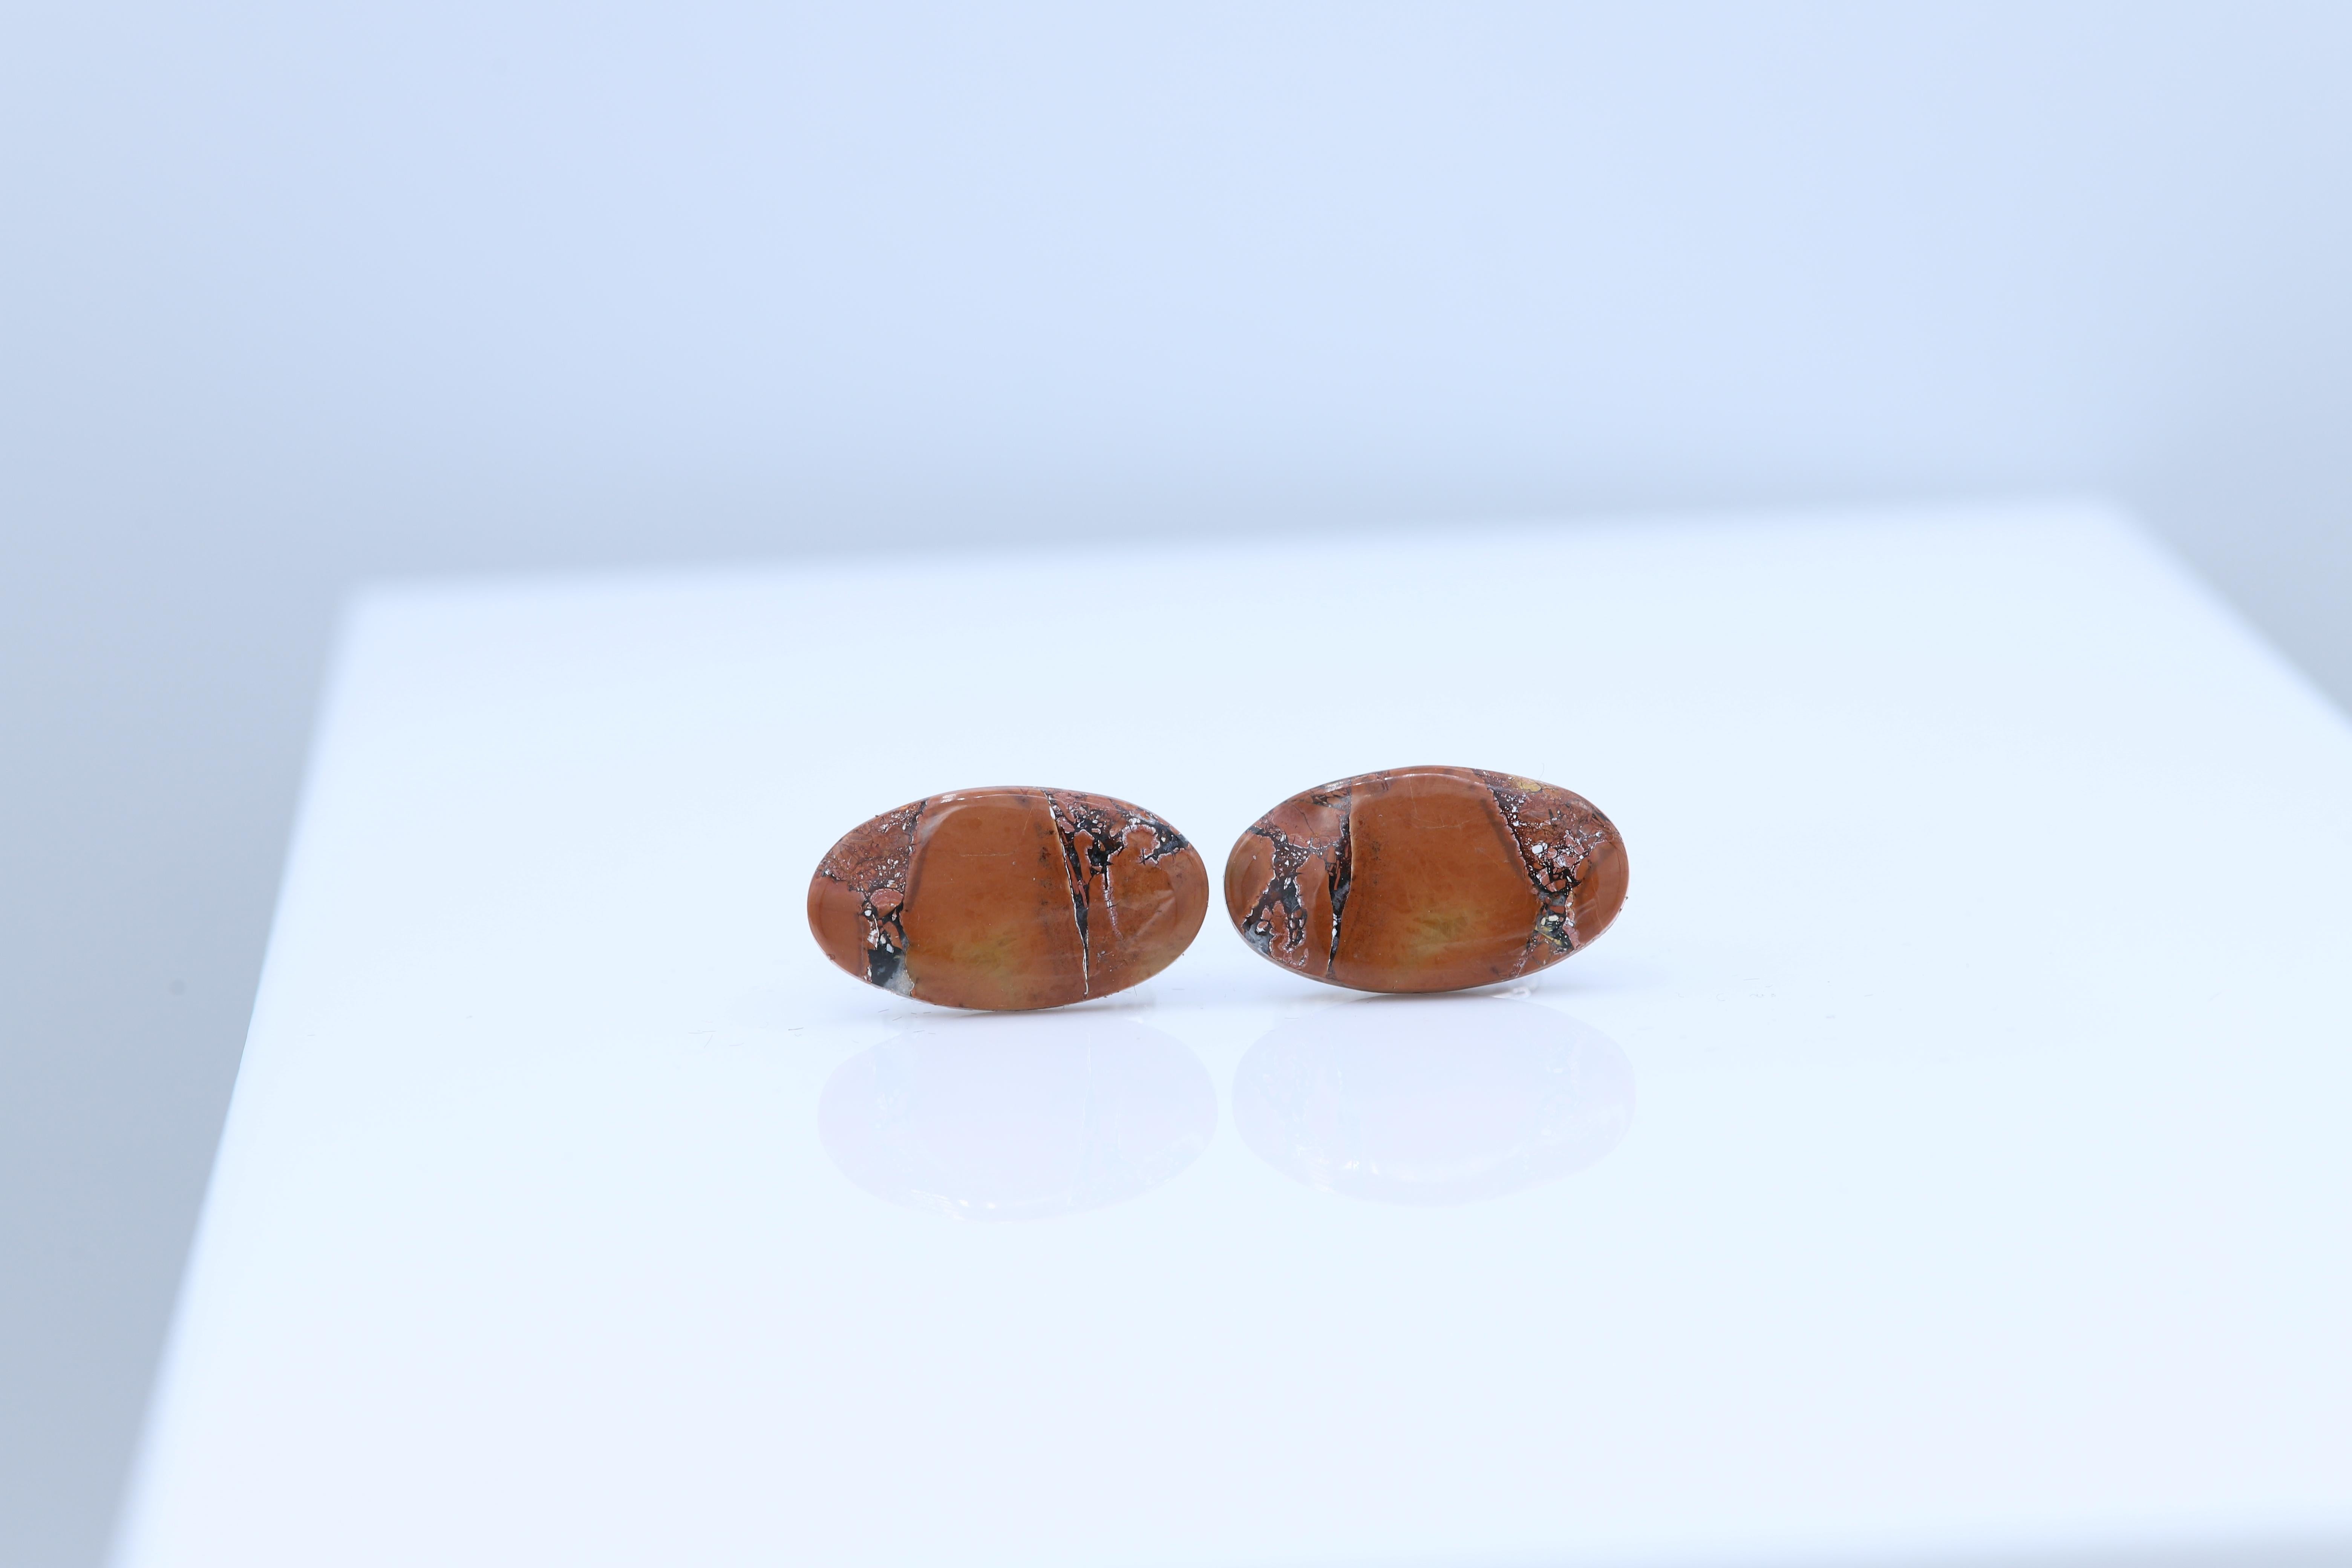 New unique men's cufflink - natural stone.
Stone name: Maligano jasper
Approx. size 26 X 14 MM
Beautiful natural texture.
Imperfection may exist due to natural formations.
Back part metal is a general alloy metal - none precious
Gift Box